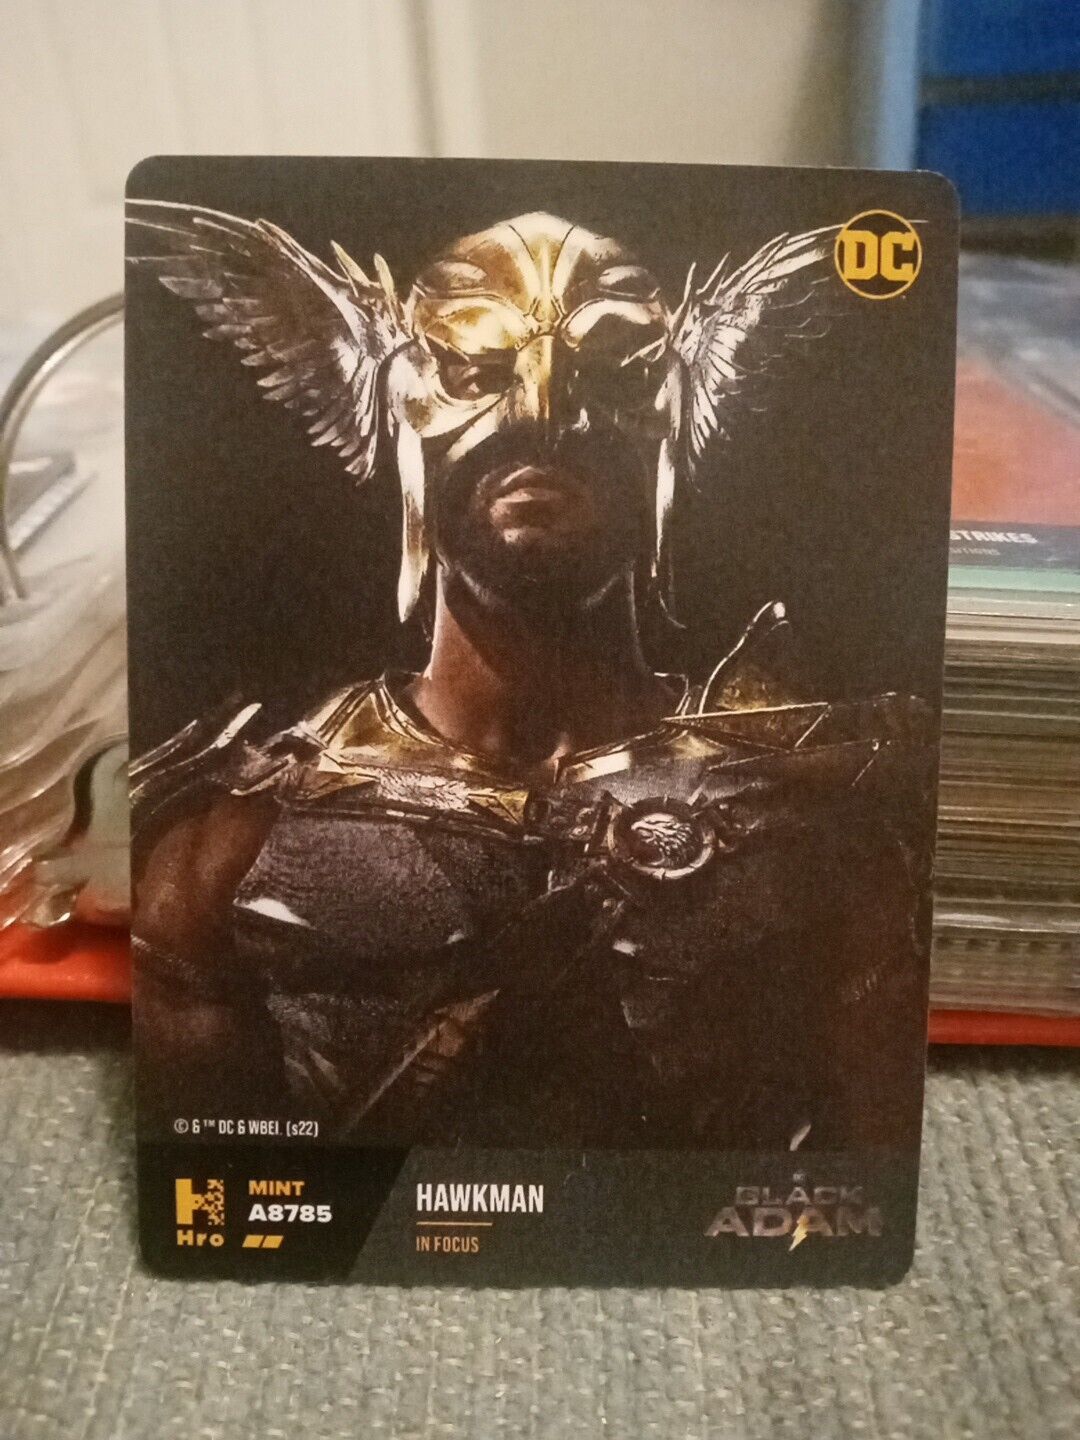 2022 DC Chapter 2 Physical Card Black Adam In Focus Hawkman A8785